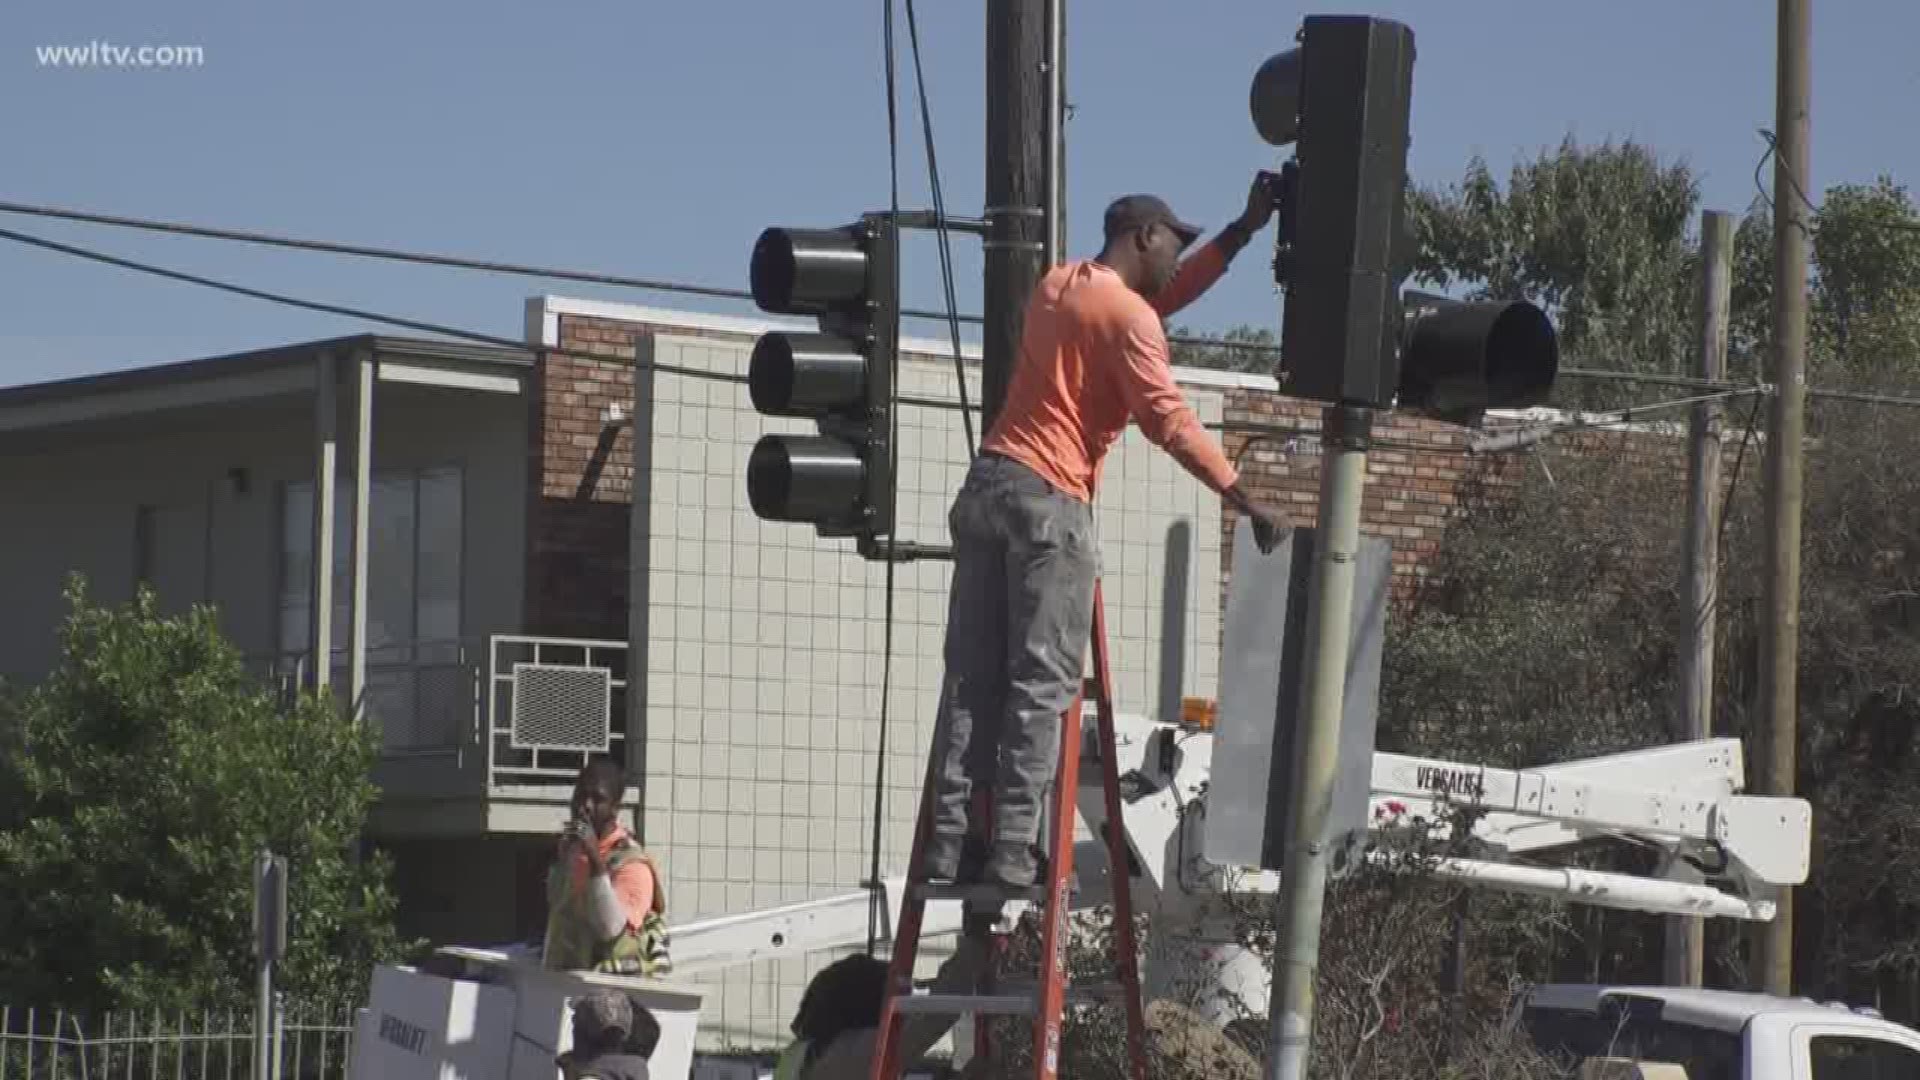 Drivers at several New Orleans intersections are seeing red.